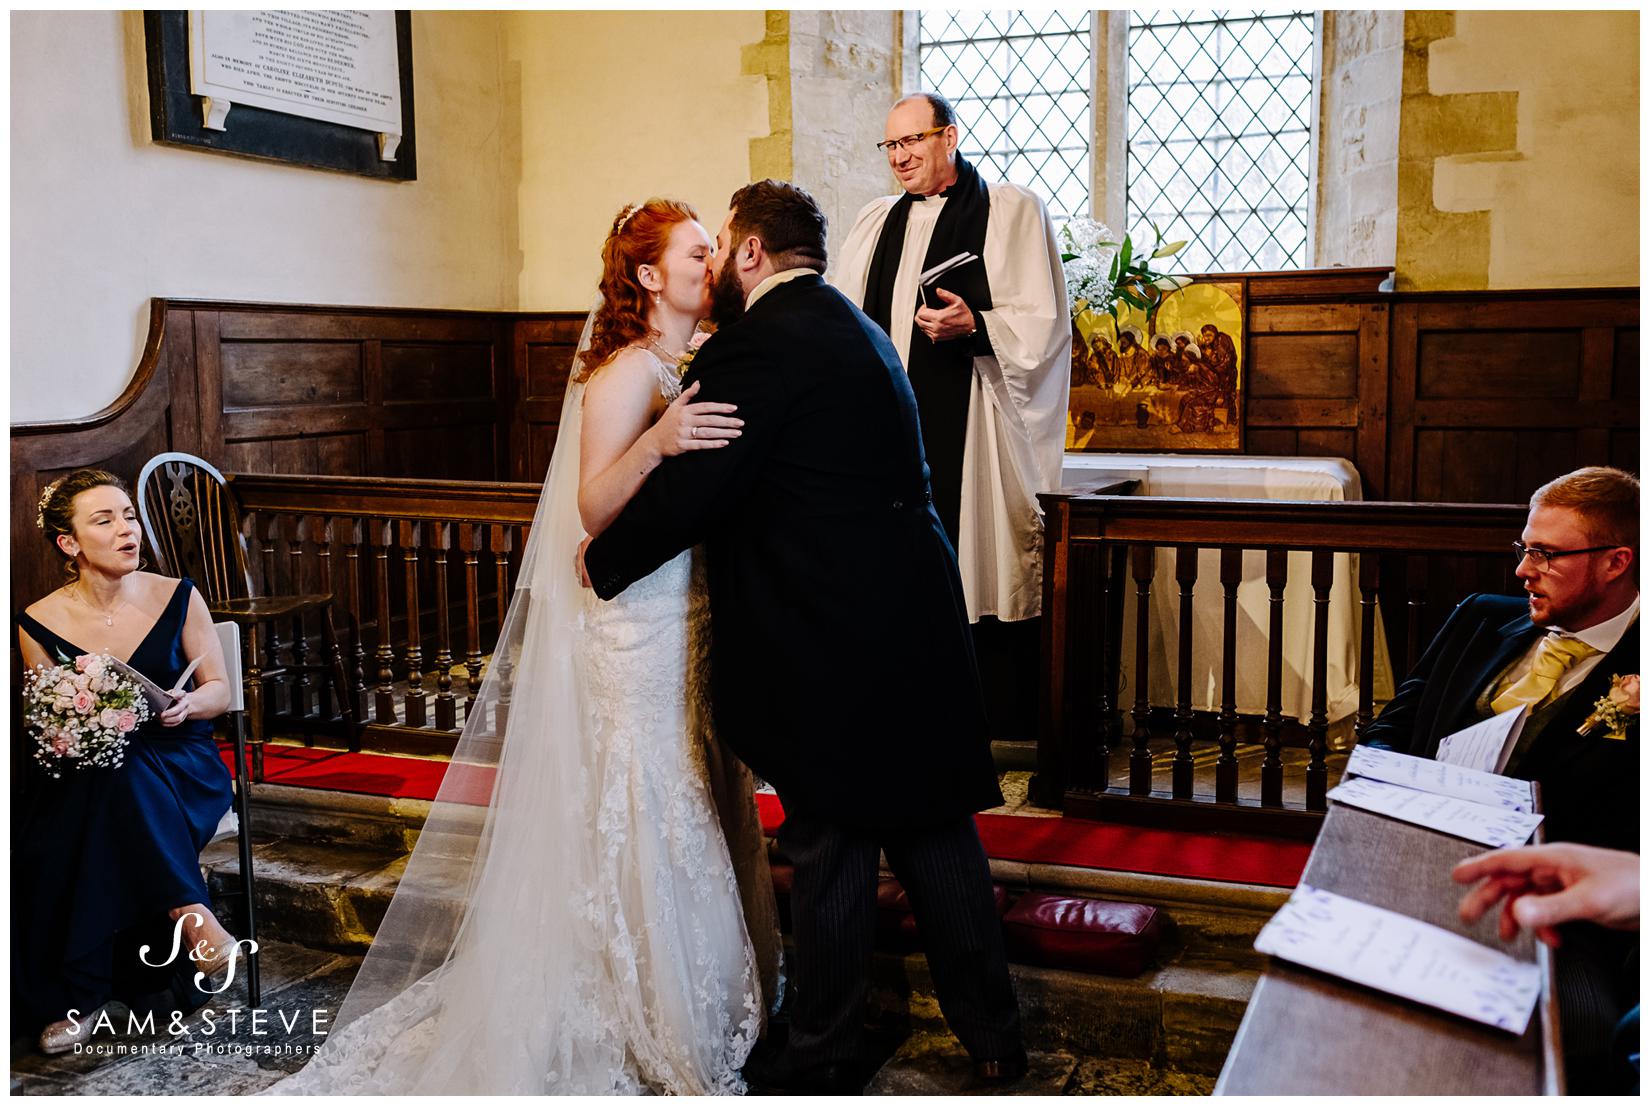  Wendlebury, Bicester Church Wedding of Millie and Nick 